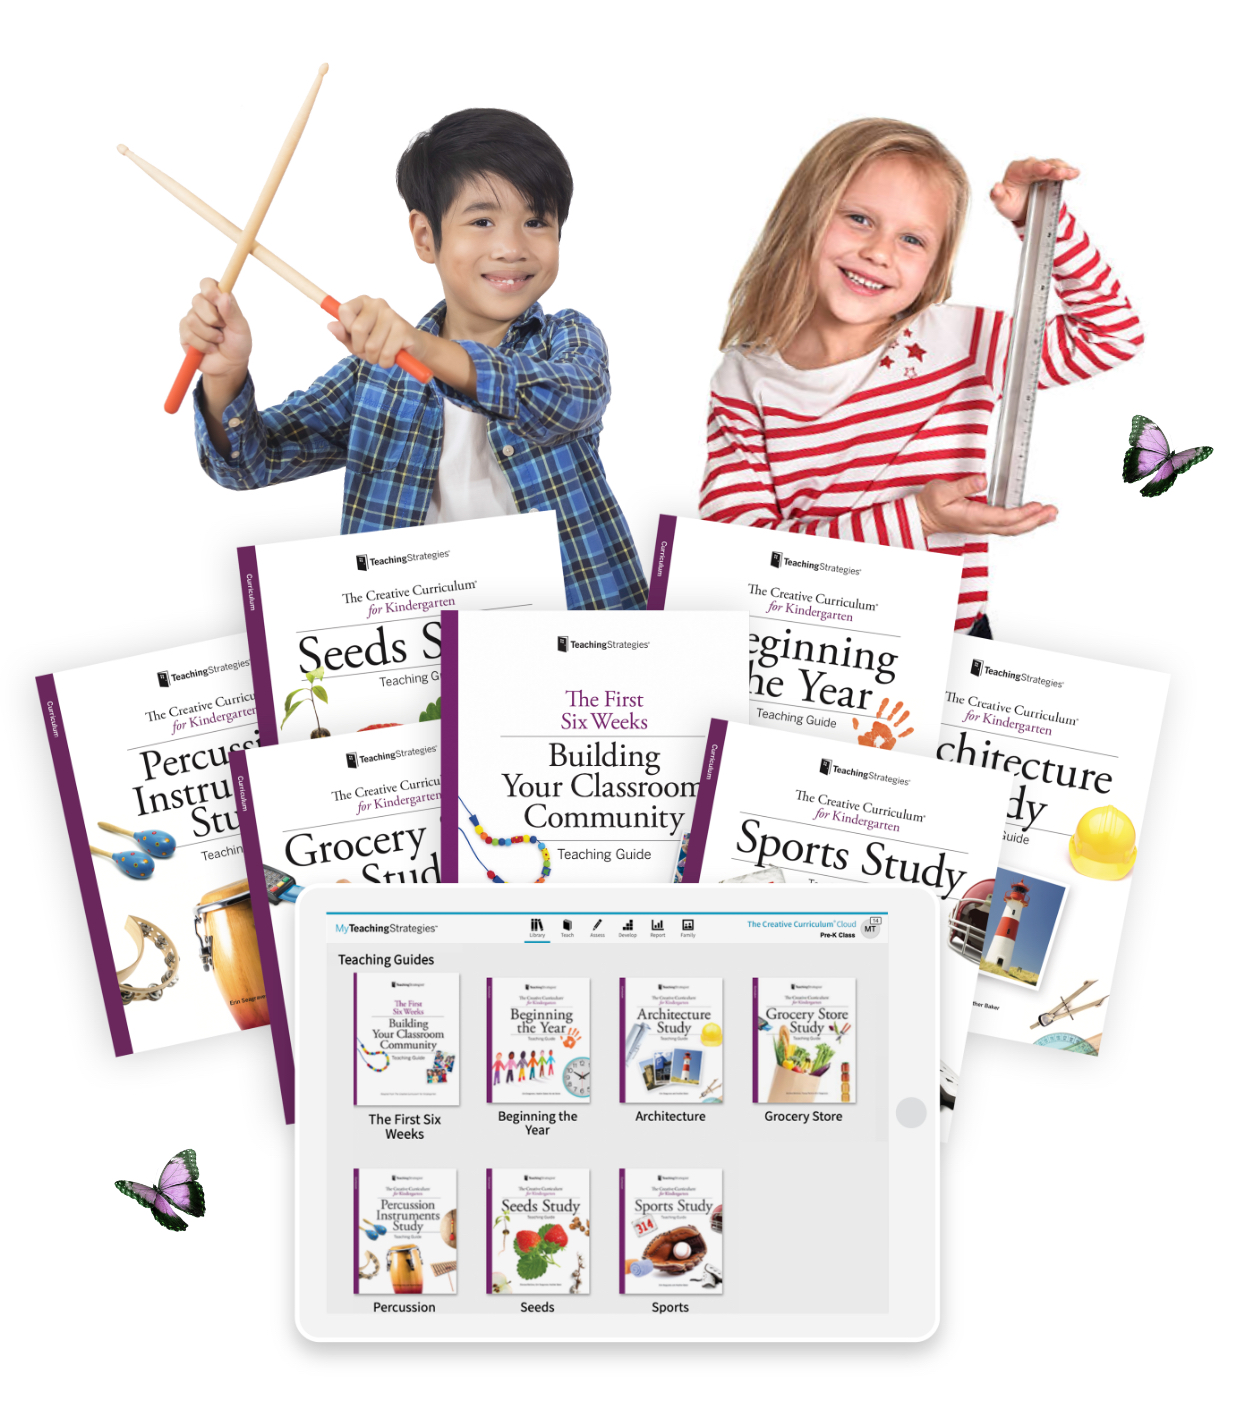 one child with drumsticks and the other with a ruler smiling with creative curriculum for kindergarten products